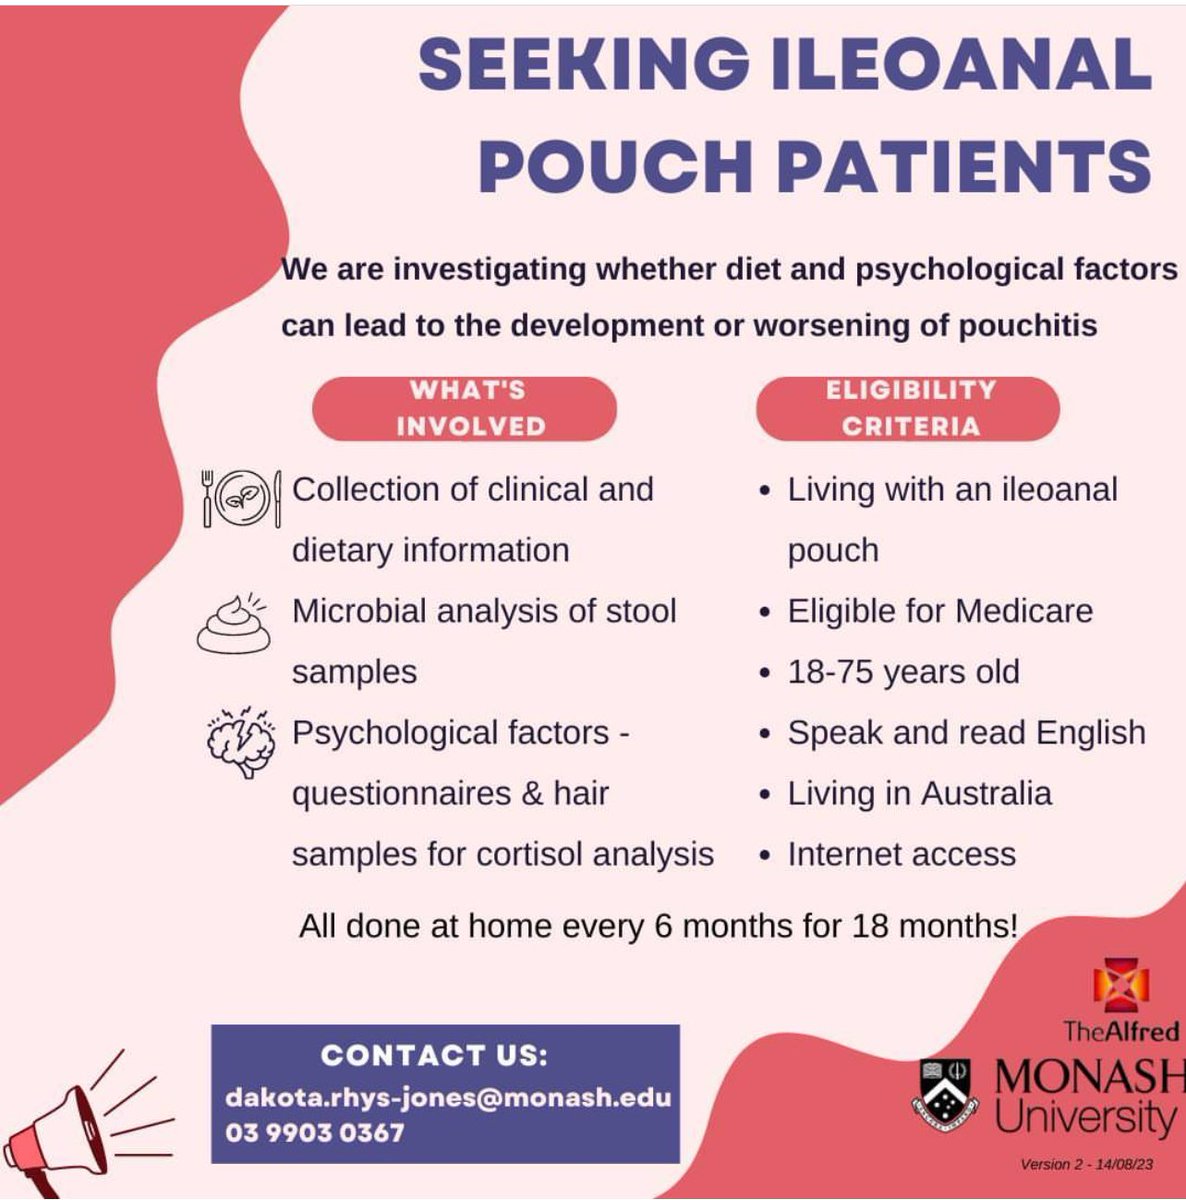 Calling all pouch patients in 🇦🇺 Please help our study- spread the word @stevenbollipo @IBD_JohnD @Crohnoid @bottomlineibd @charismaew @Prof_NickTalley @rupertleong @yao_ck @ArdalanZaid any pouch patients in Australia??